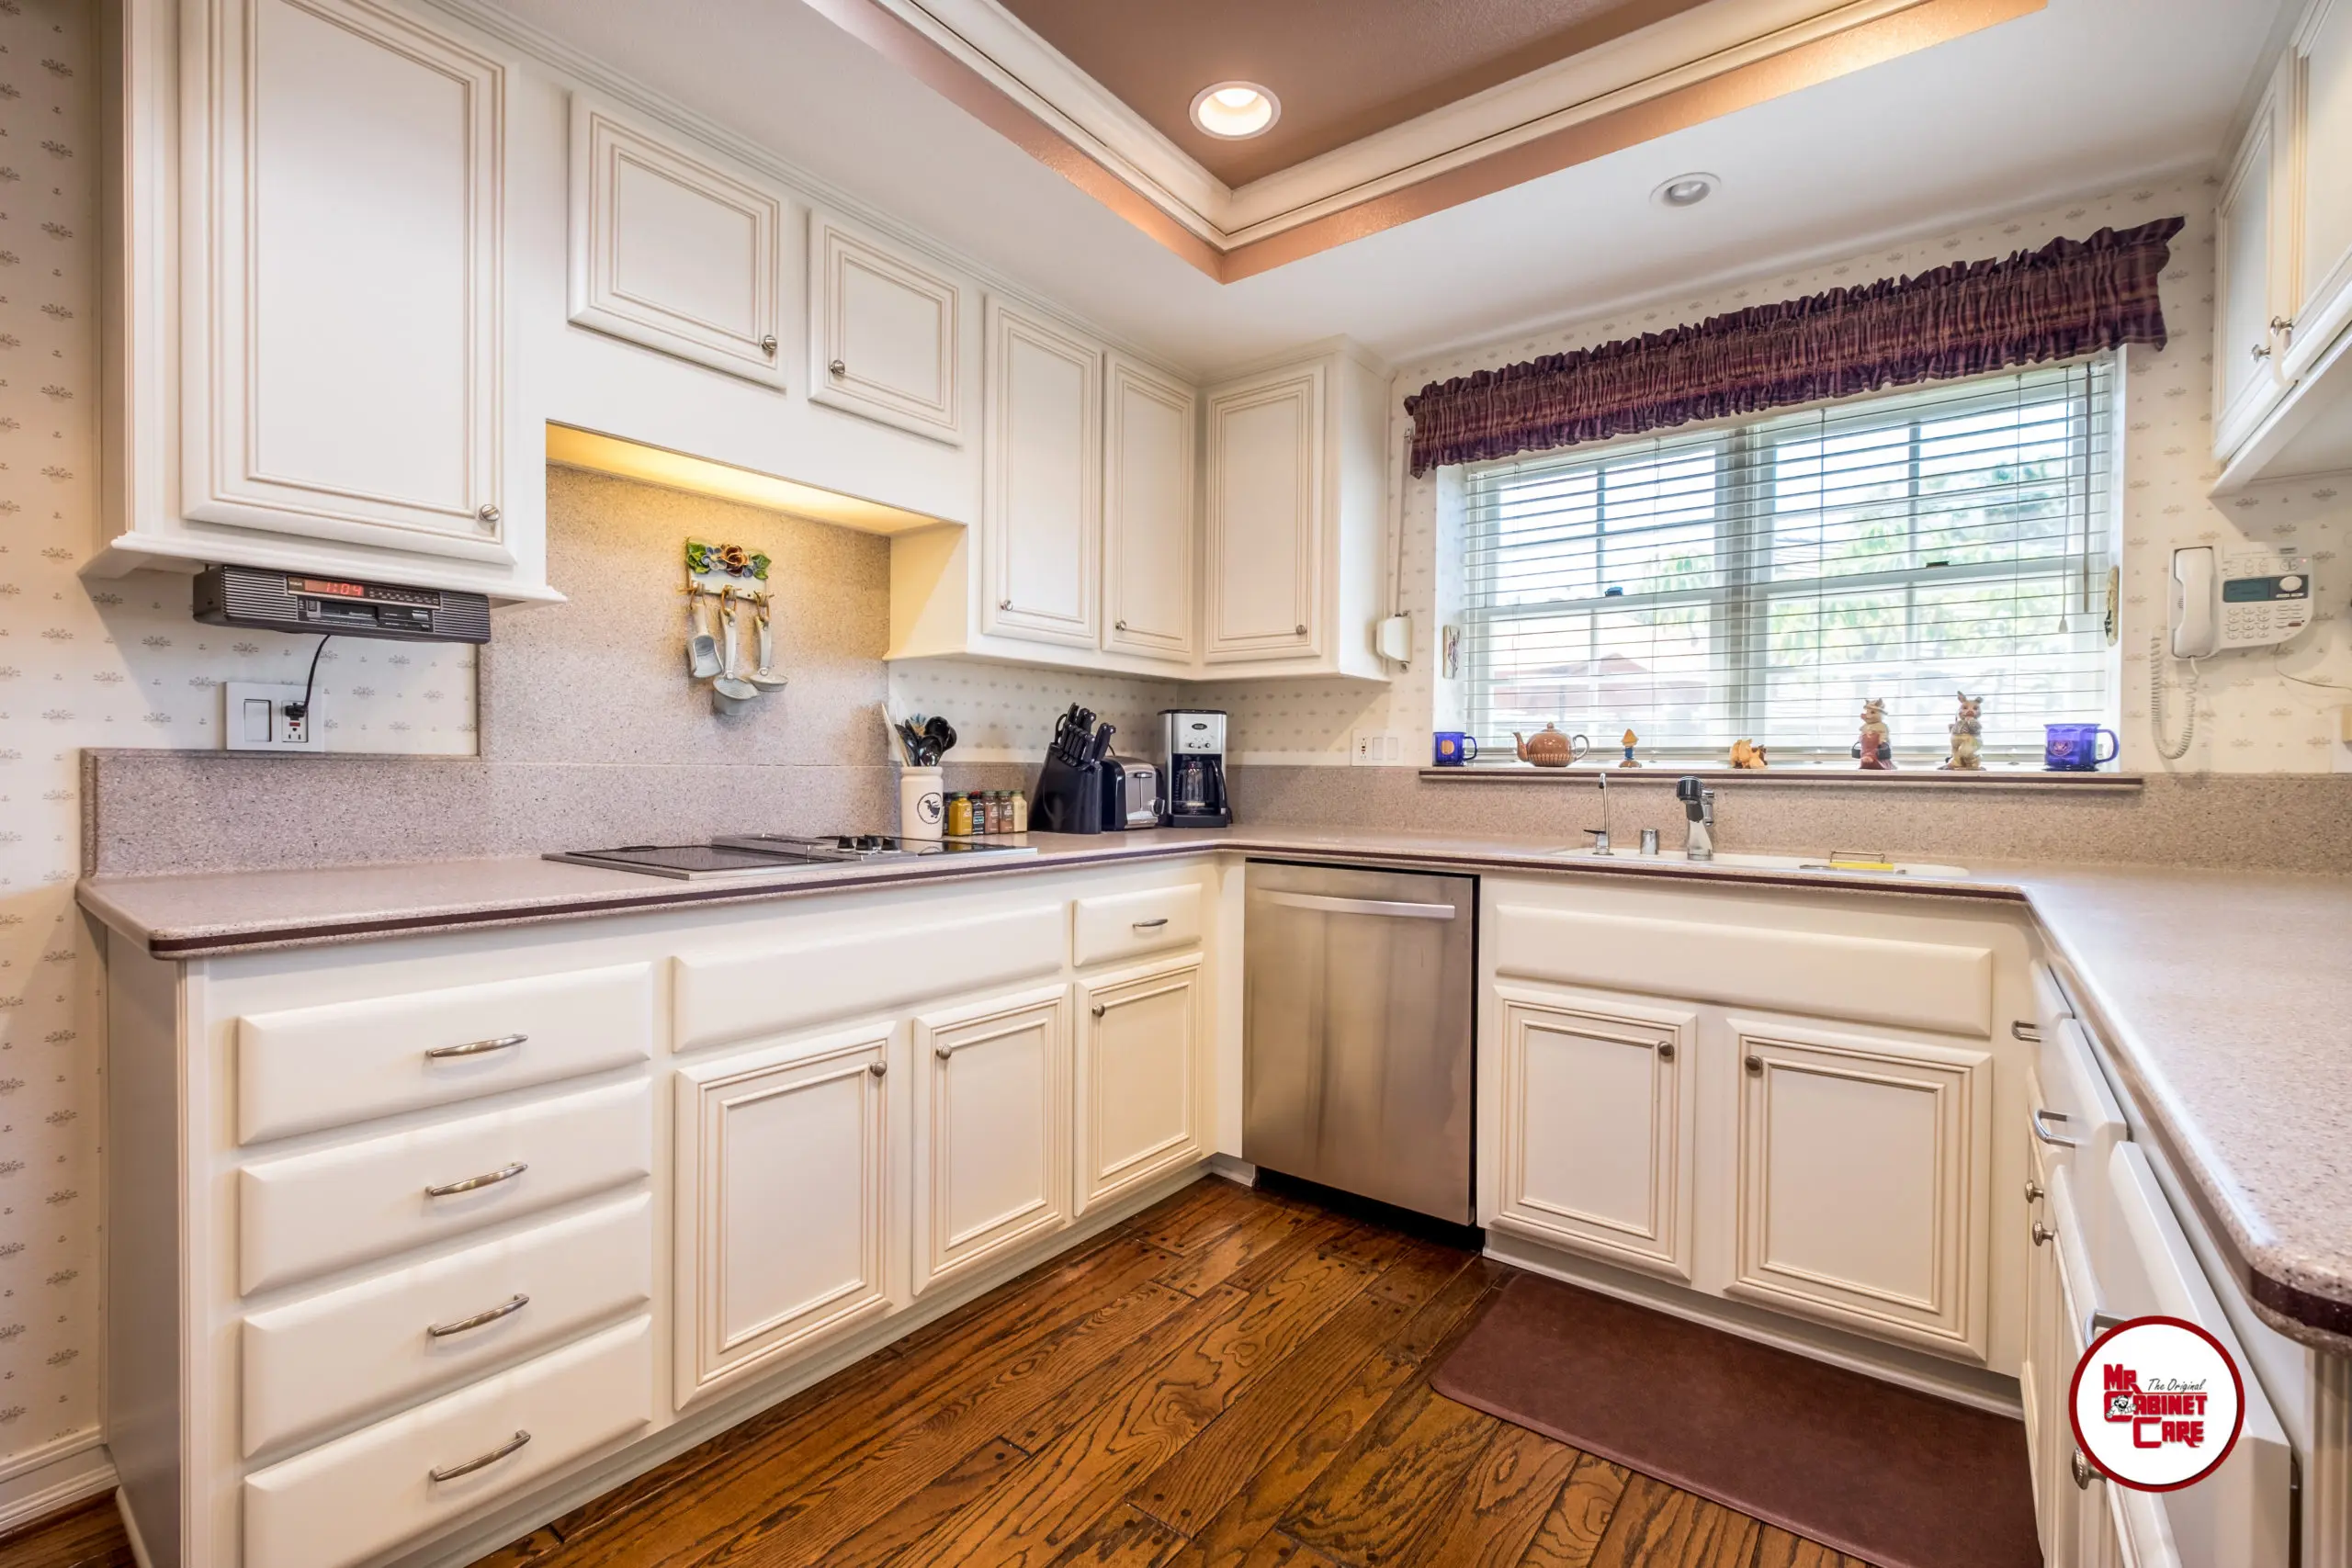 Breaking Down The Costs Of Cabinet Refacing, How Much Does Refinishing Cabinets Cost